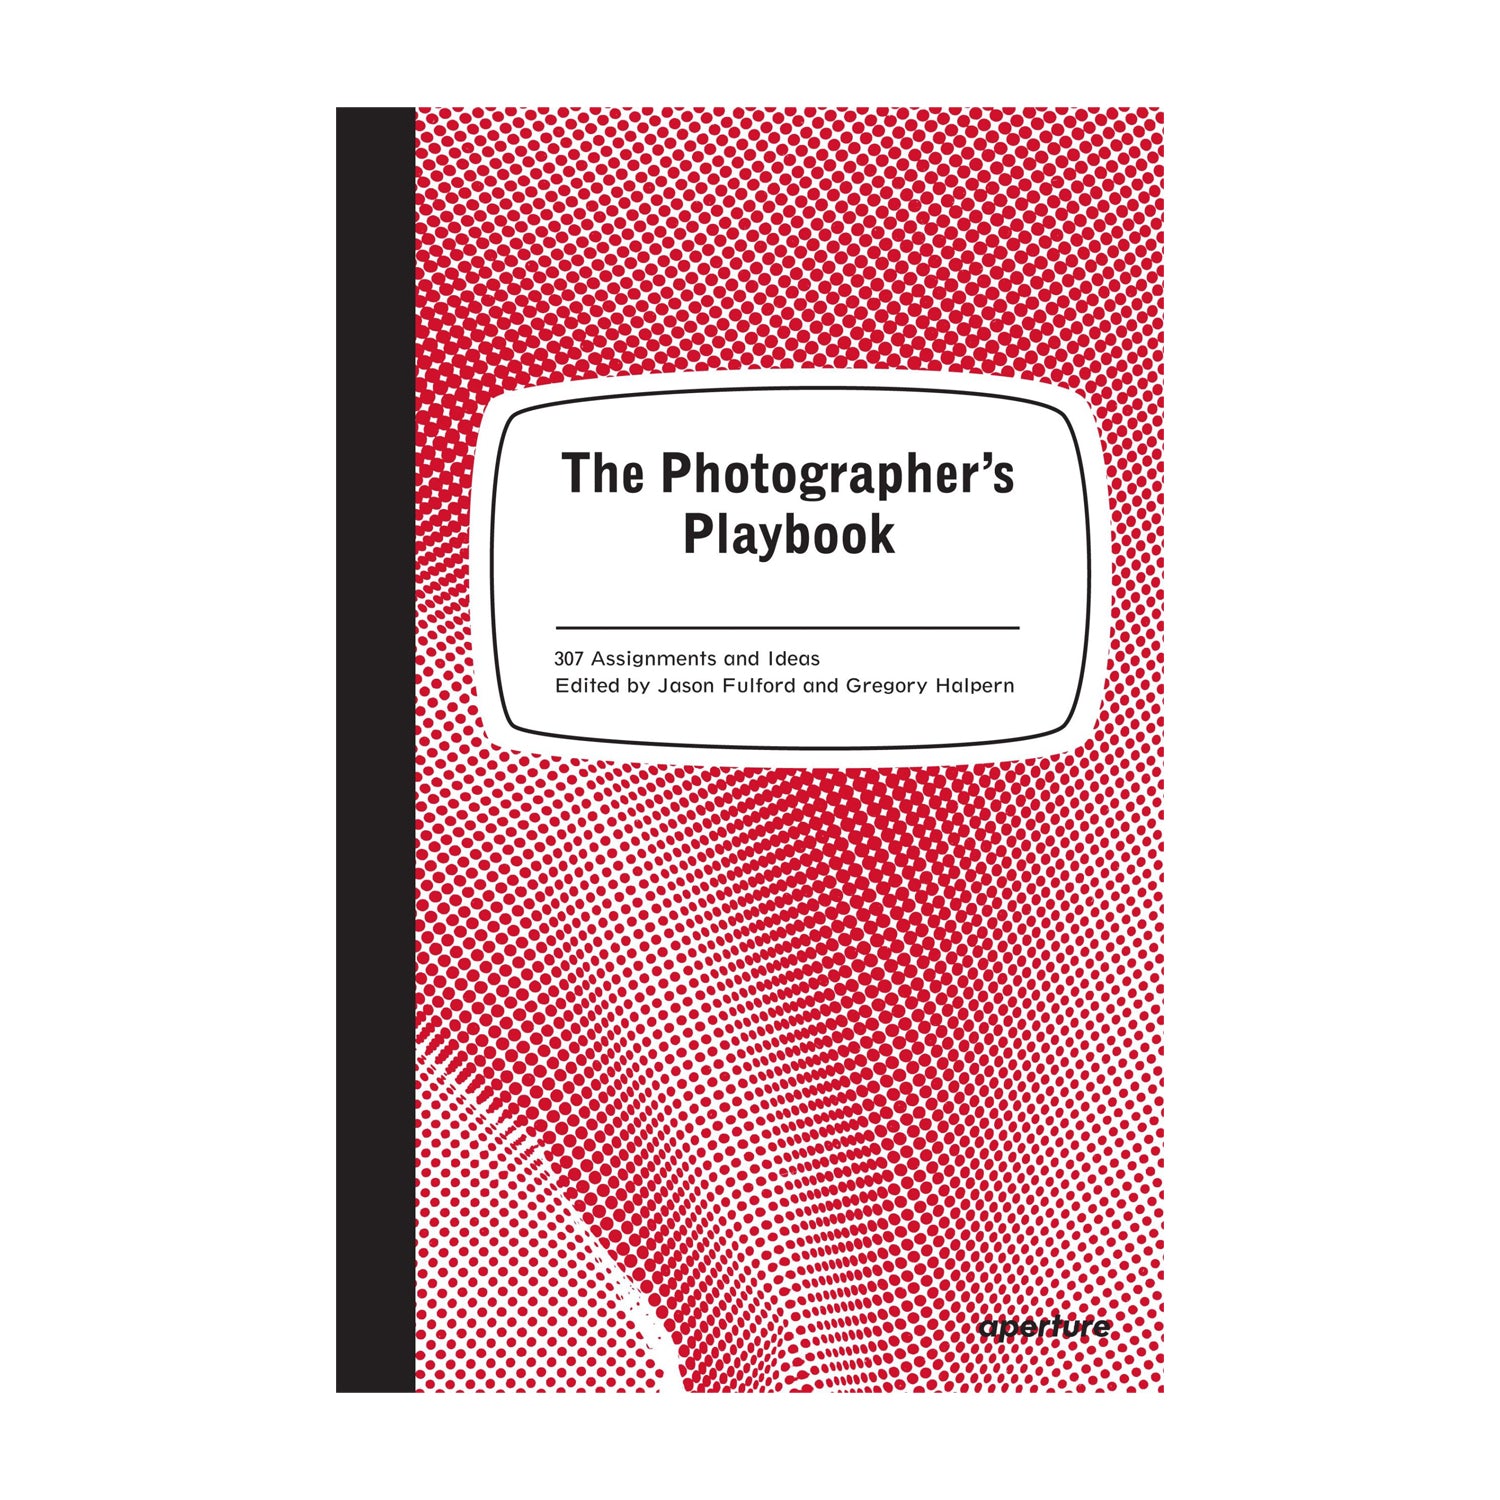 The Photographers Playbook by Jason Fulford and Gregory Halpern